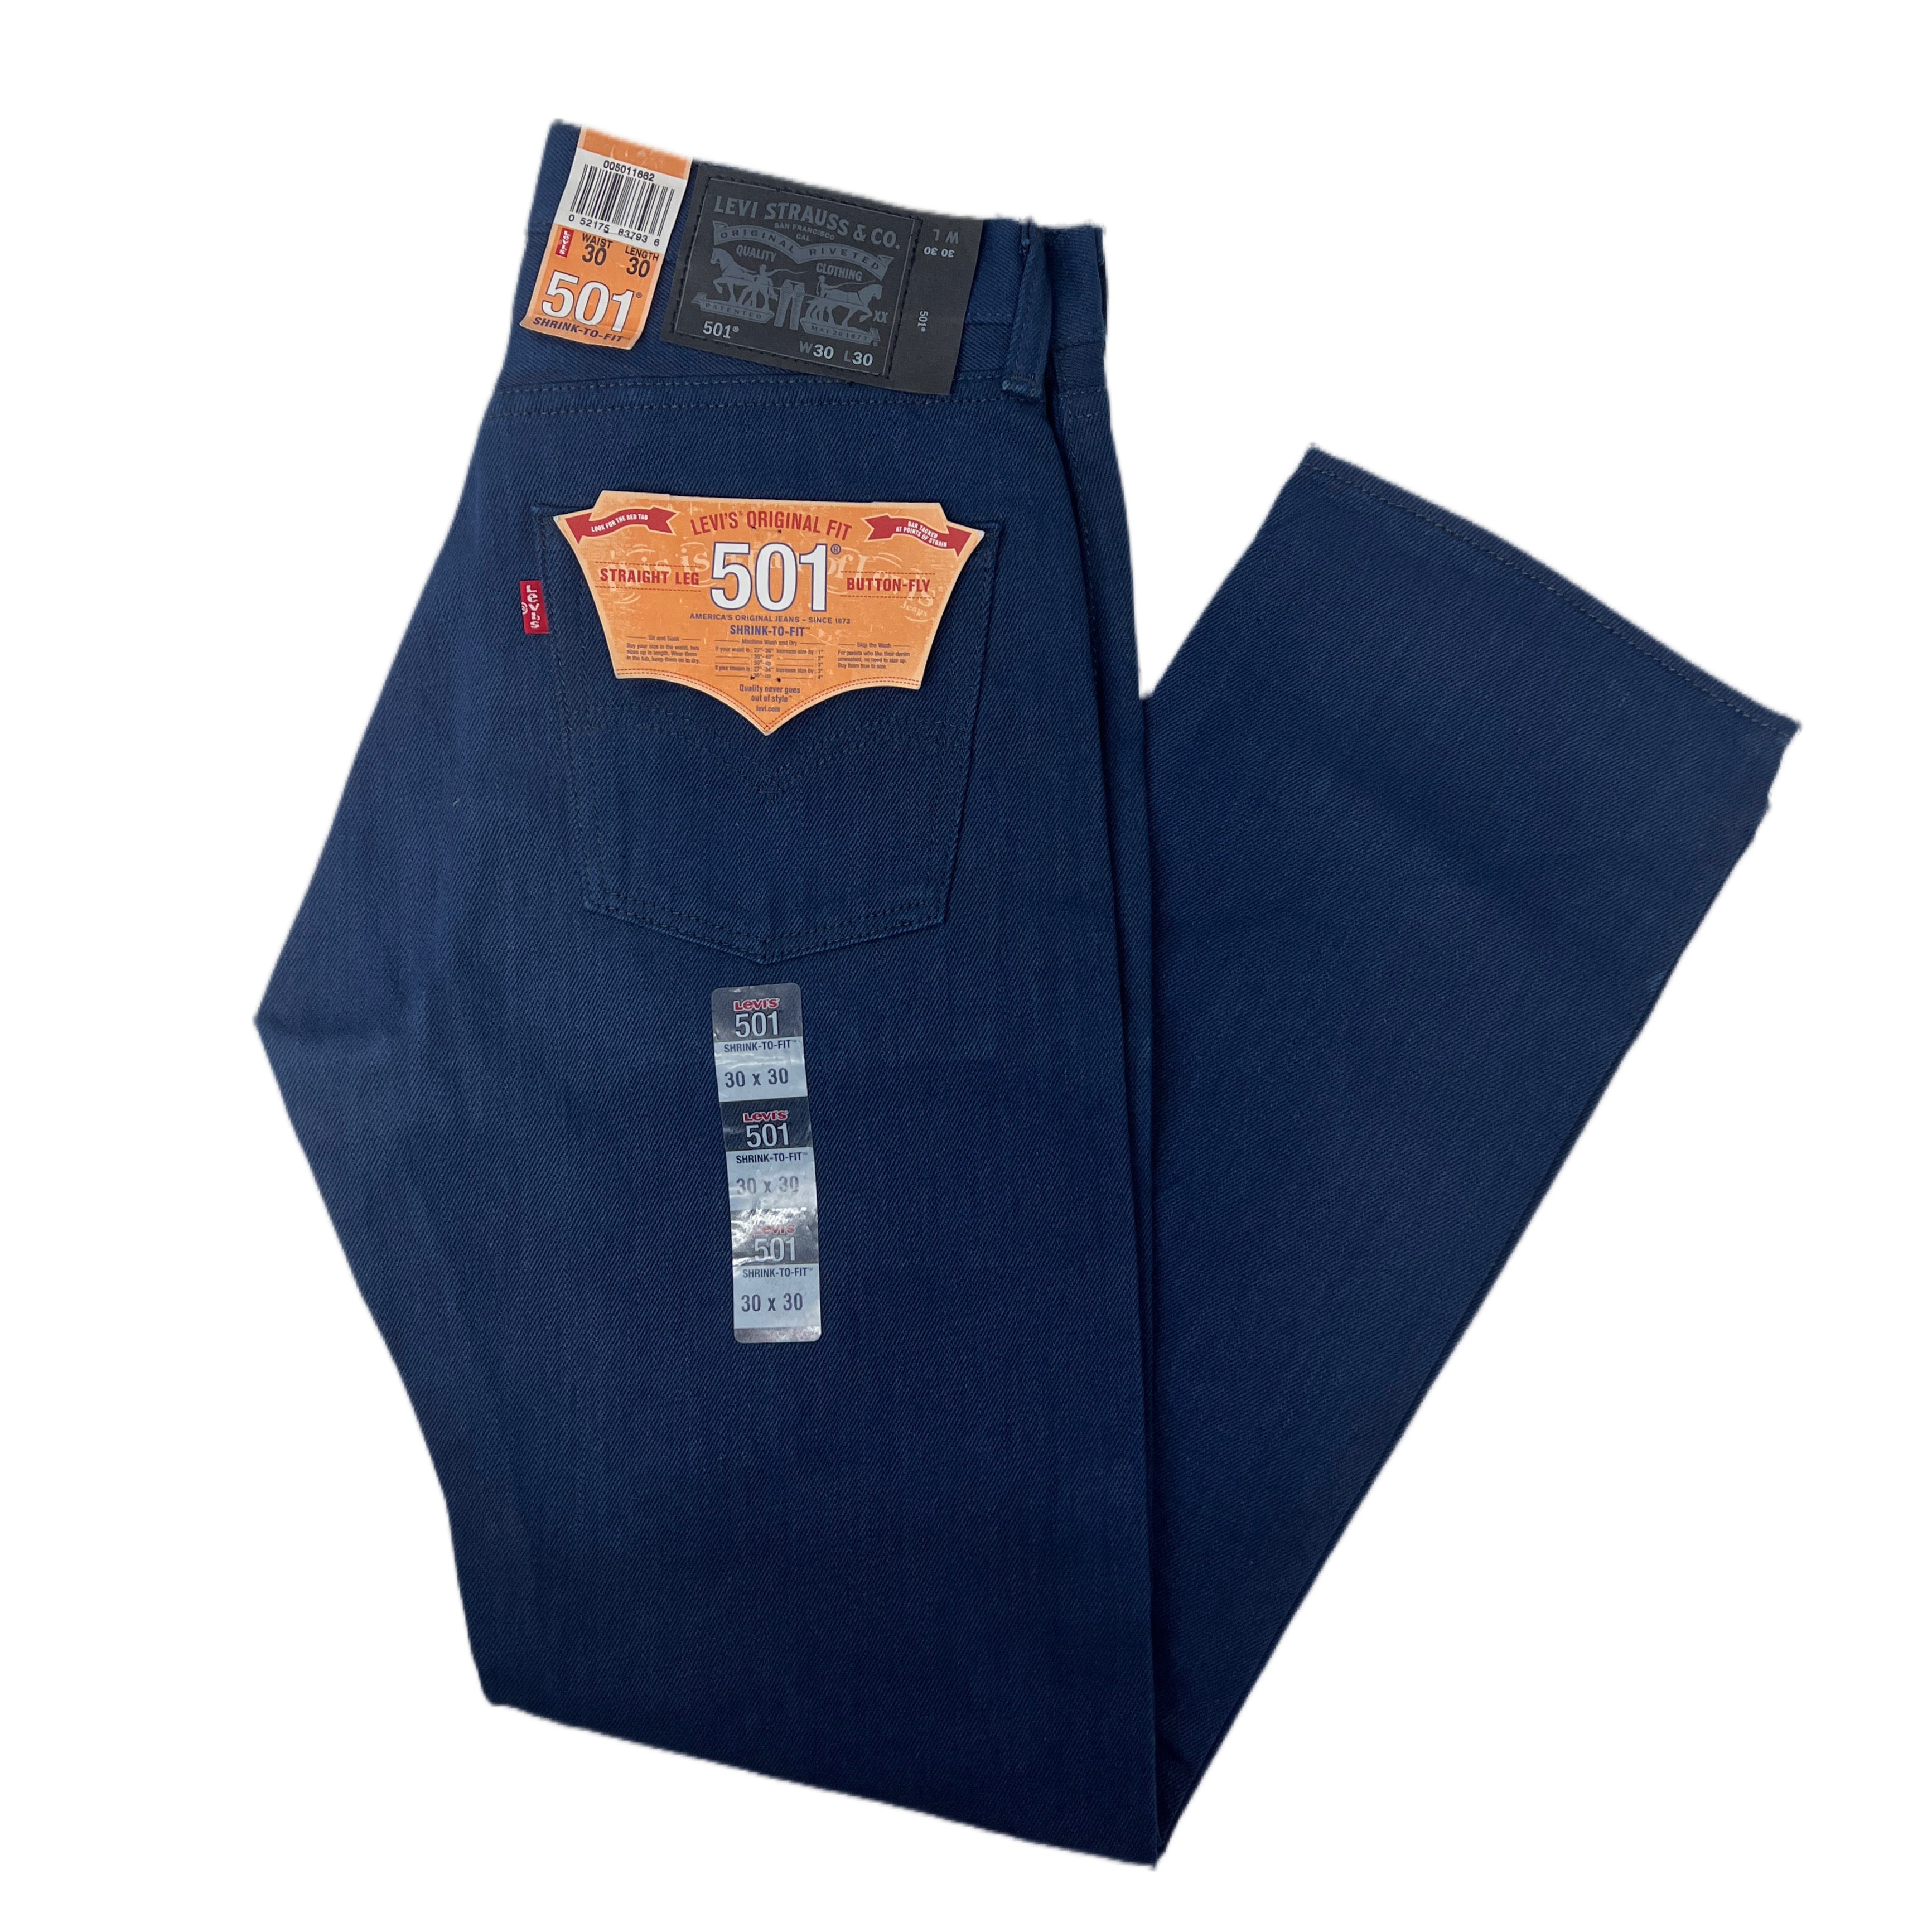 Levi's 501 Shrink-to-Fit - Navy